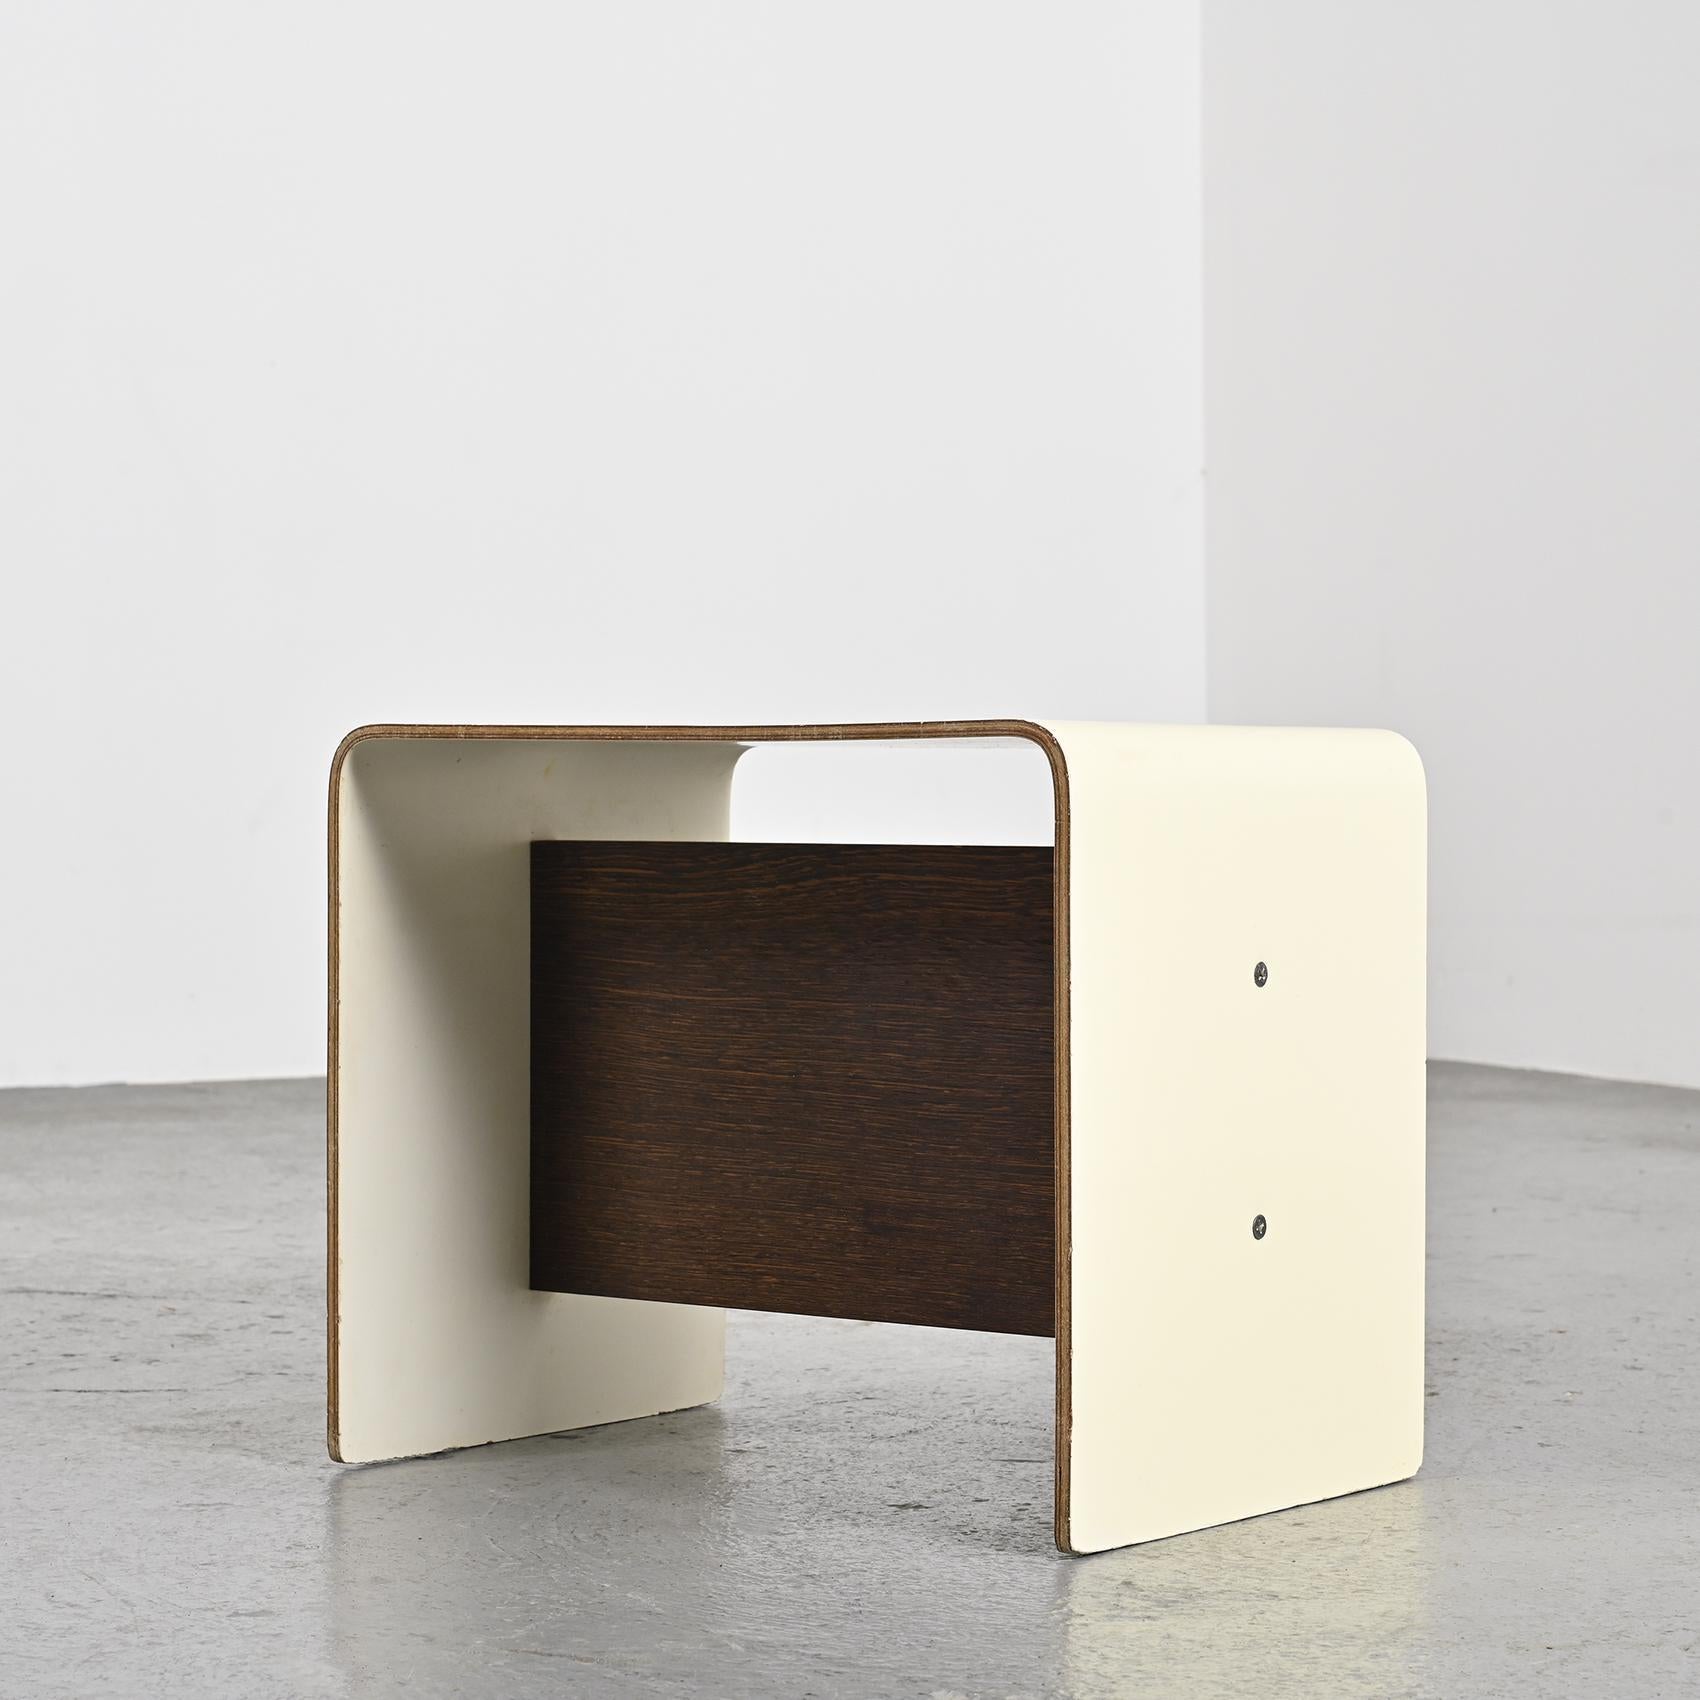  Pair of Bedside Tables by Pierre Guariche, circa 1968 For Sale 1